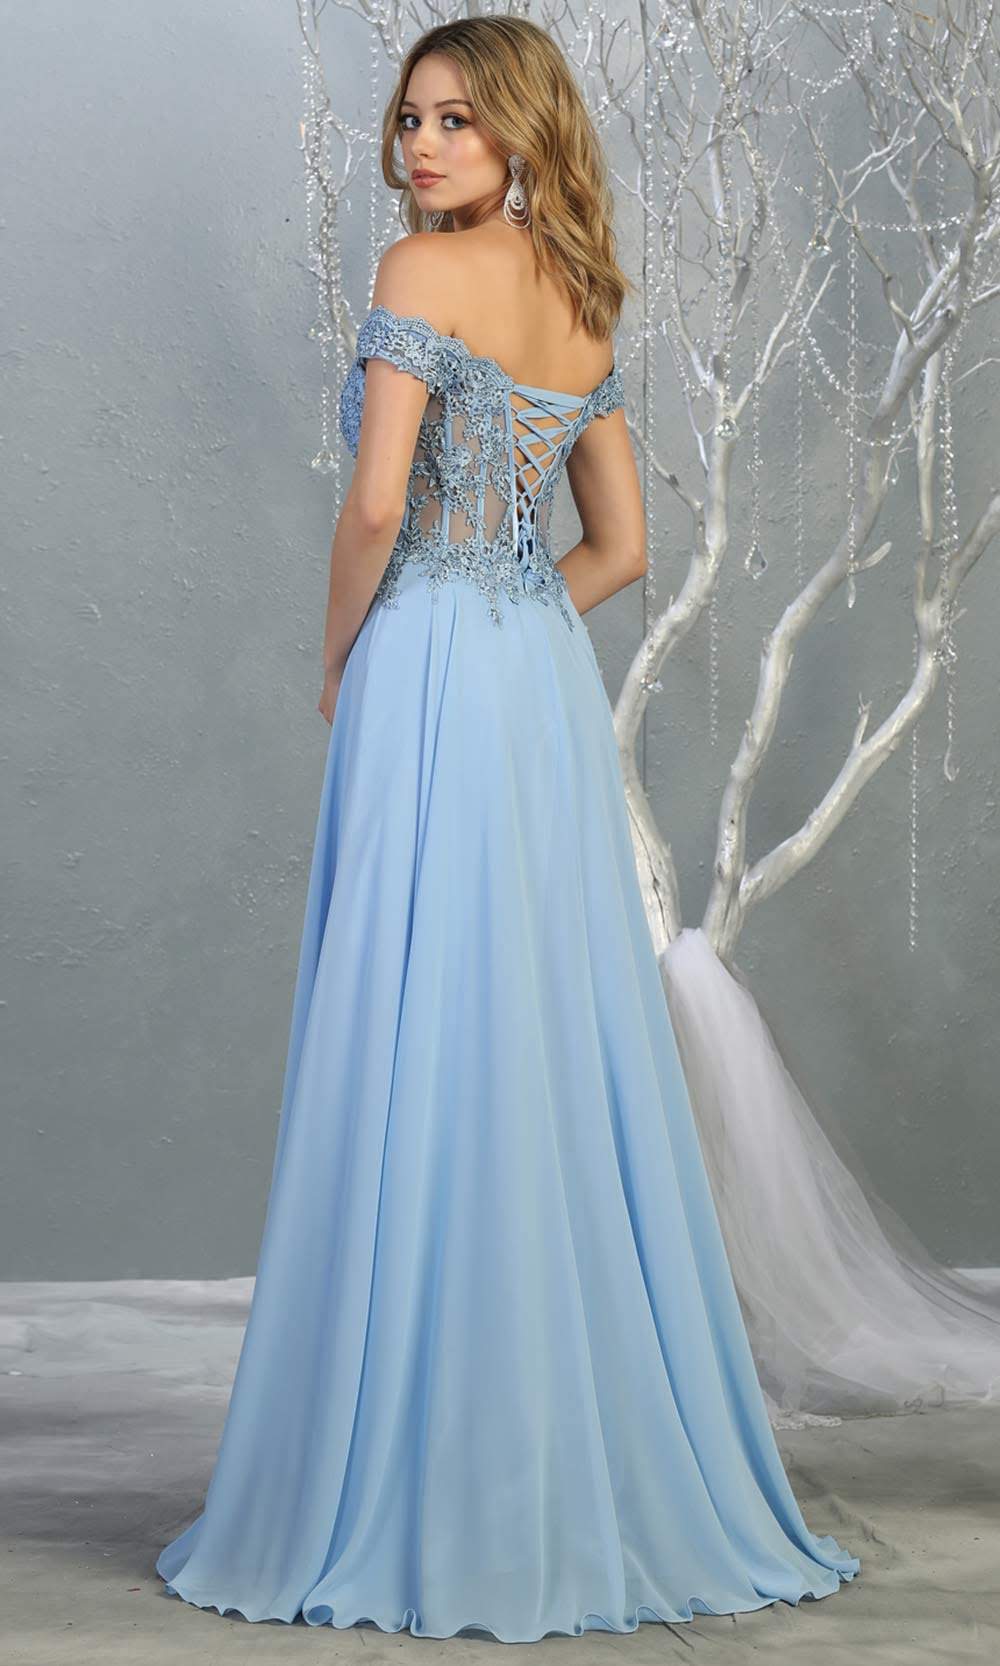 Mayqueen MQ1714 long perry blue flowy dress features an off shoulder lace neckline top with a chiffon flowy skirt. Perfect for bridesmaid dresses, simple prom dress, formal wedding guest dress,indowestern party dress,black tie party.Plus sizes avail-b.jpg